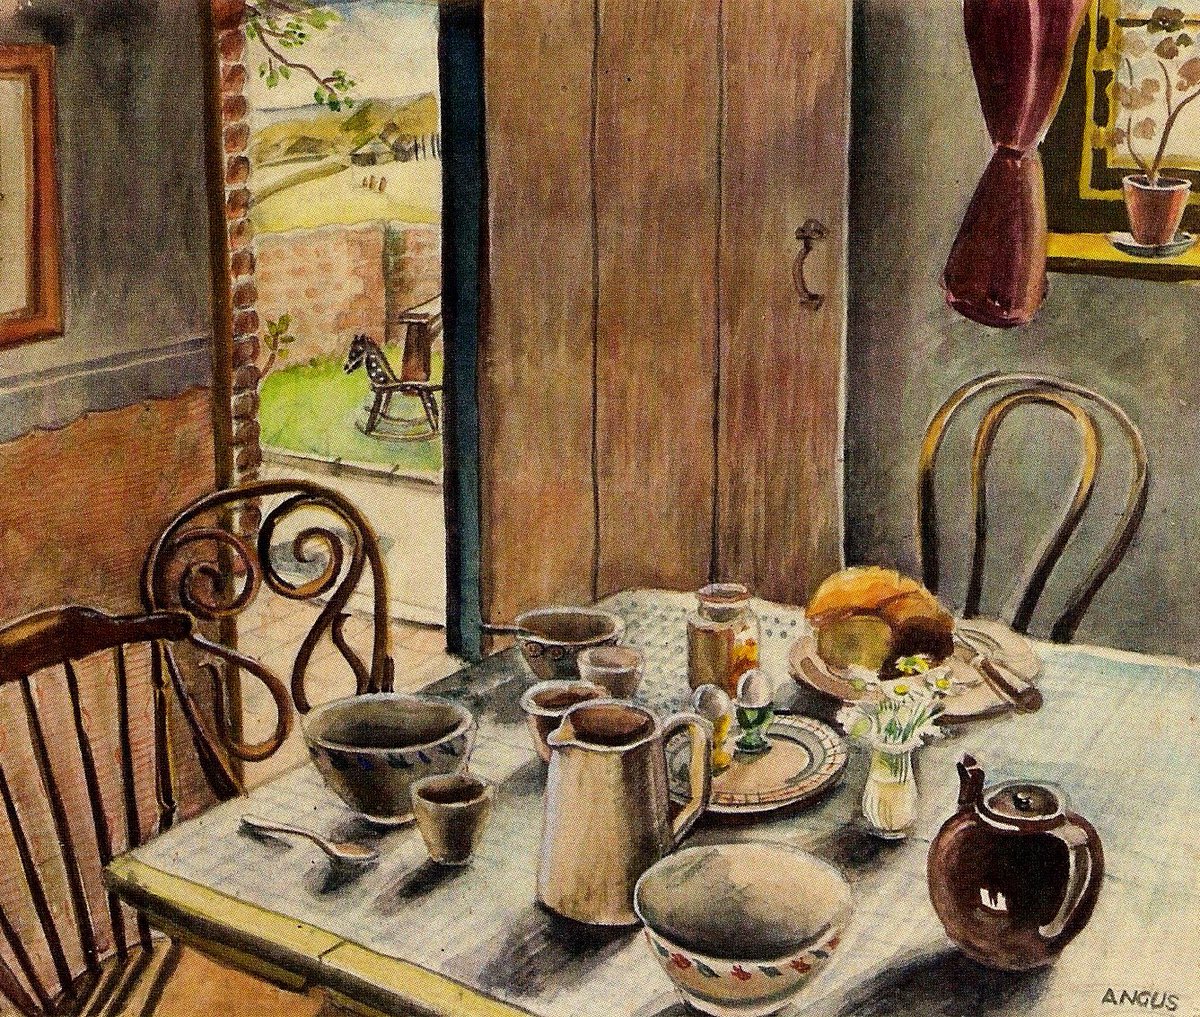  #BeyondRavilious - and by  #WW2 she was still at Furlongs, now teaching in Sussex and London. The Three Bears by Peggy Angus, c.1945 depicts breakfast at Furlongs at this time.